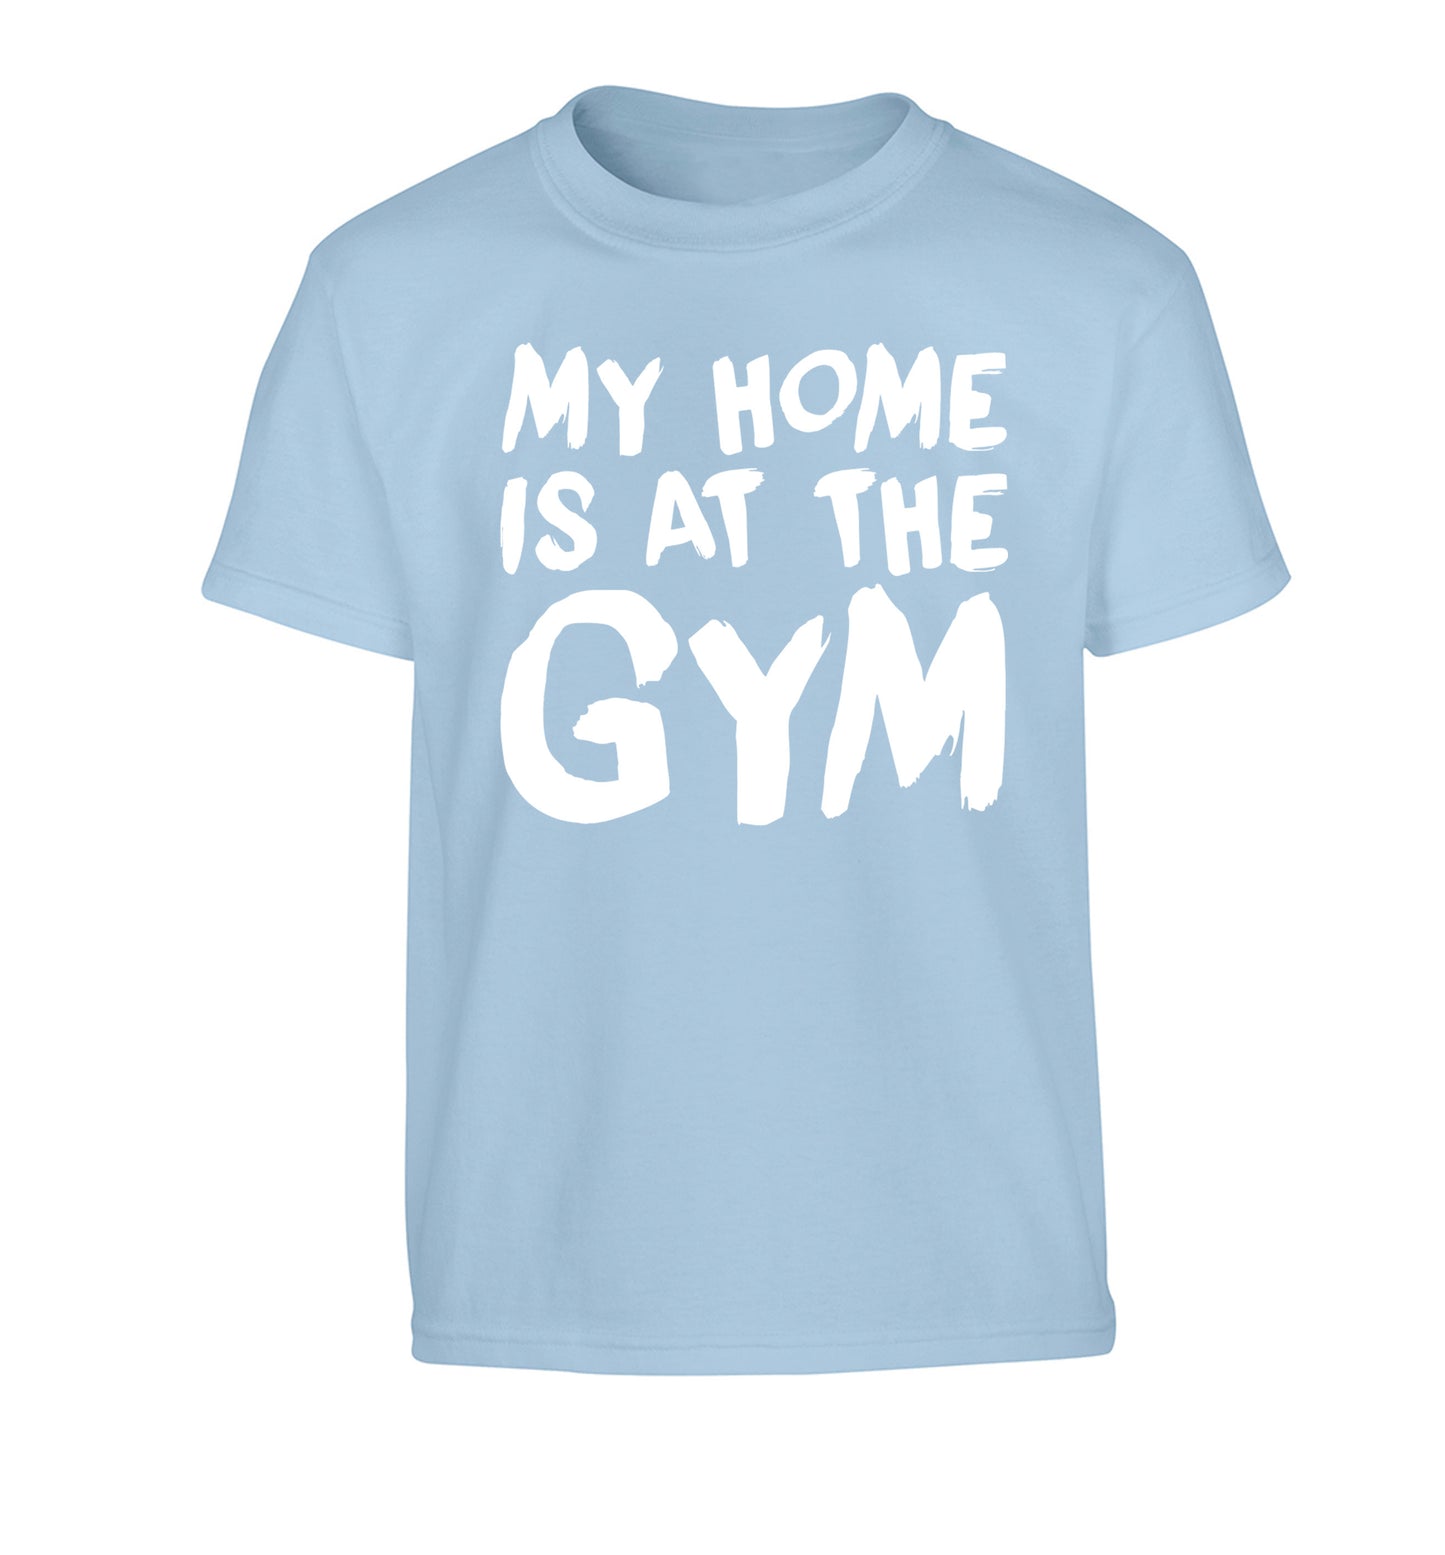 My home is at the gym Children's light blue Tshirt 12-14 Years